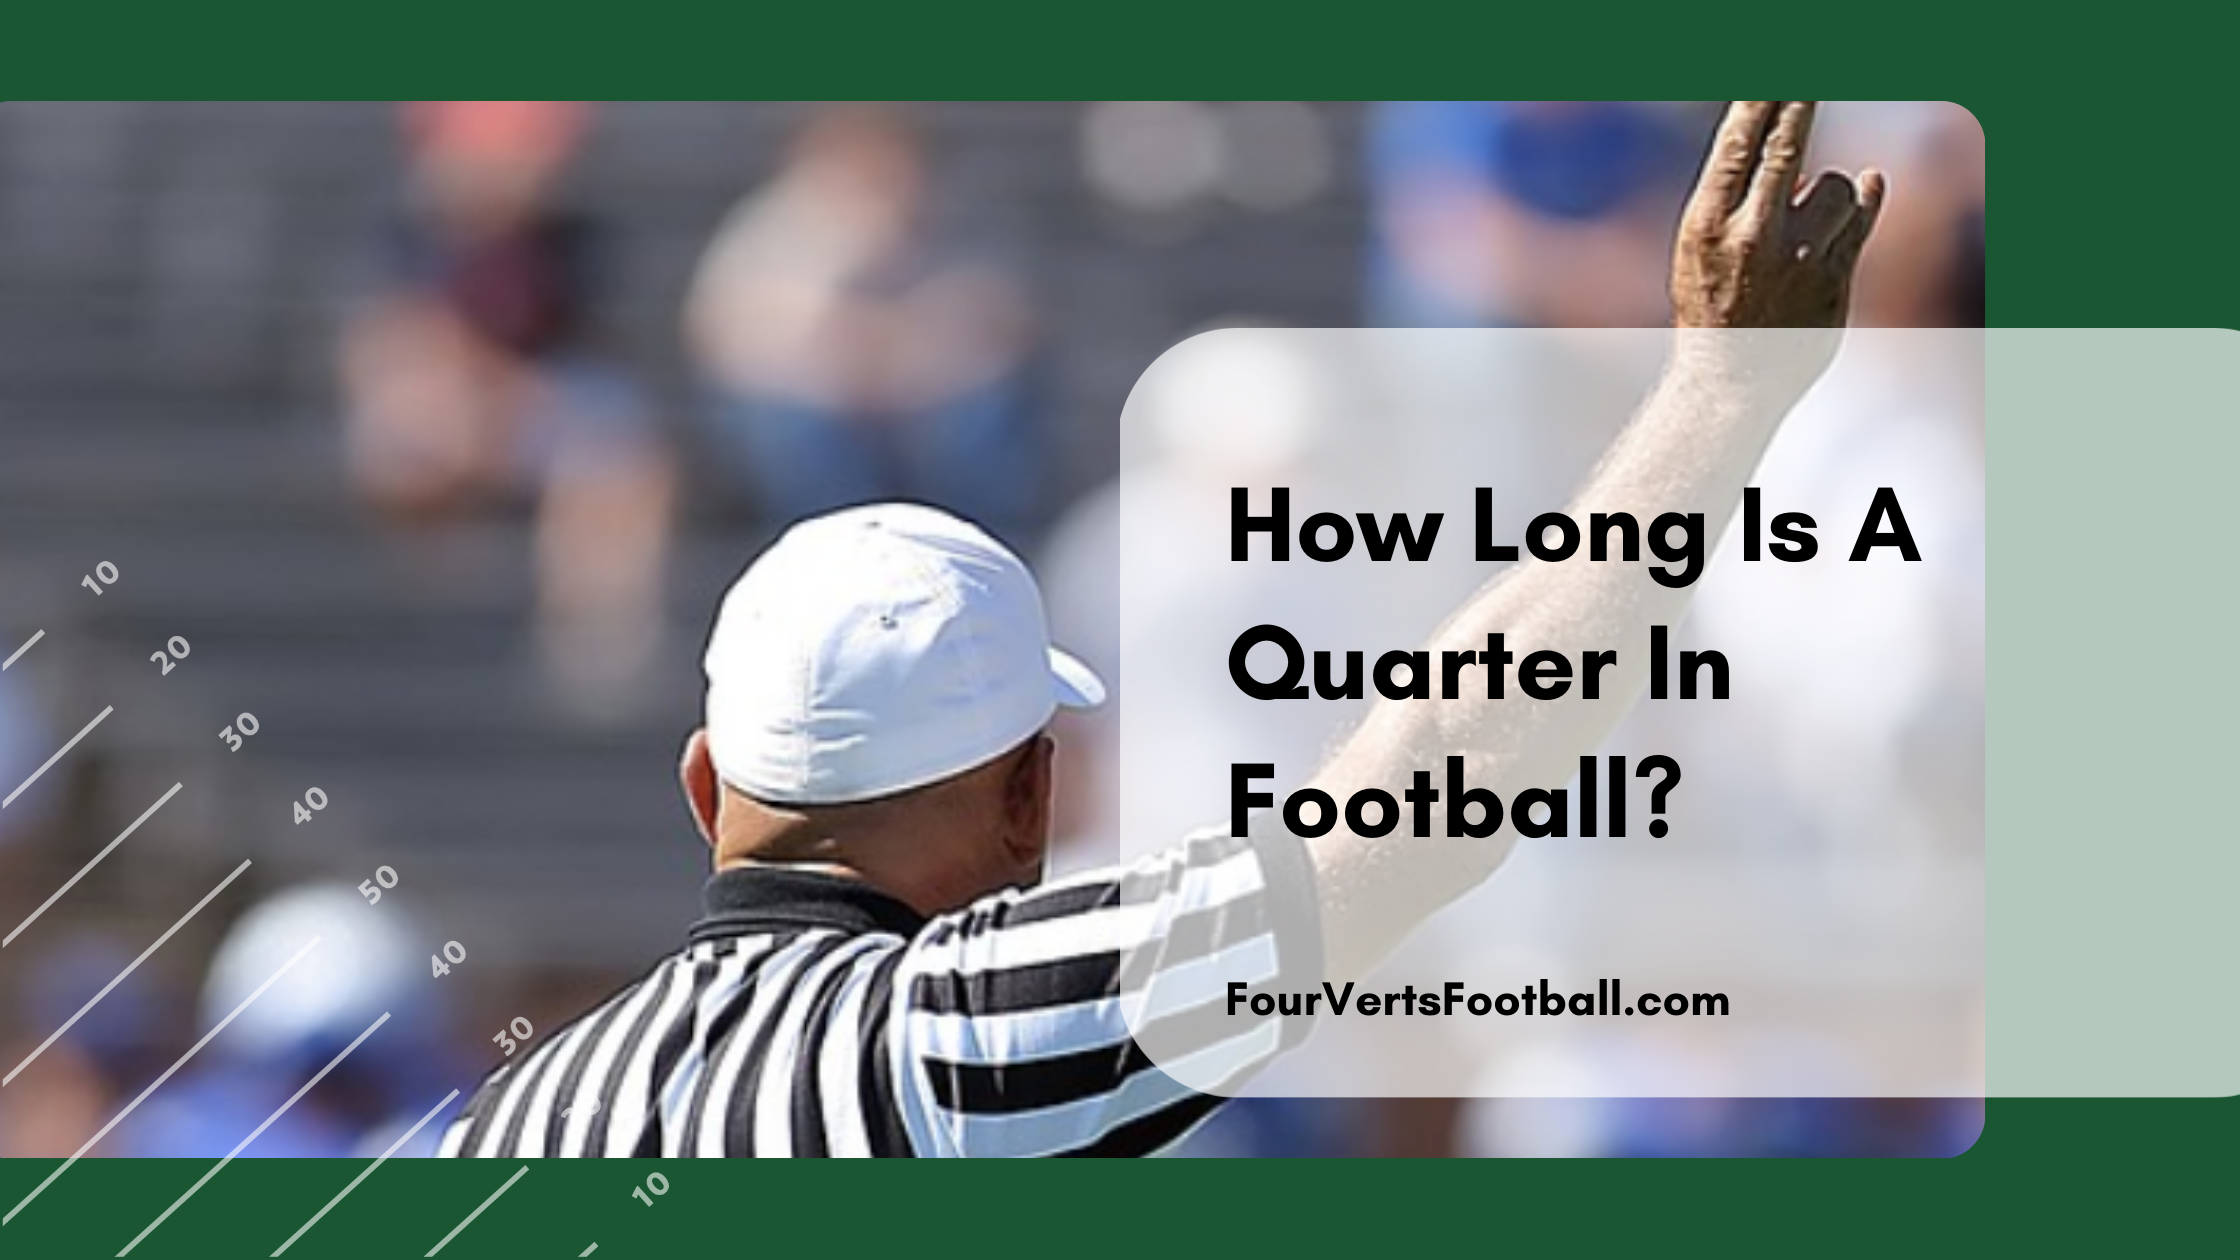 How Long Is A Quarter In Football?